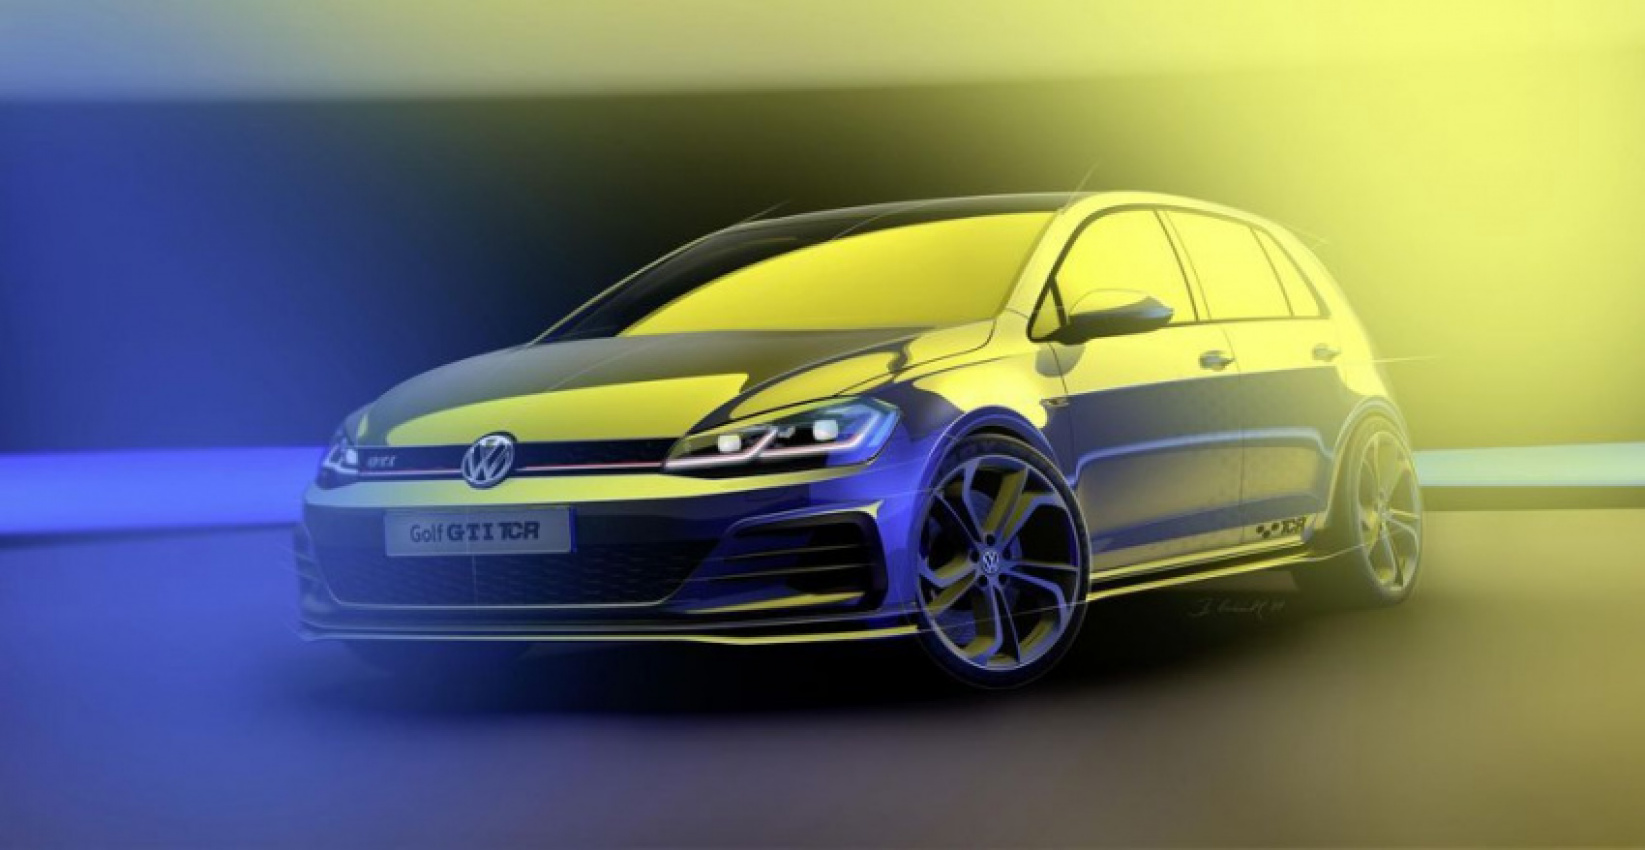 autos, cars, volkswagen, auto news, golf, golf gti, volkswagen golf, volkswagen golf gti, worthersee, volkswagen to launch a road version of this 350 ps race specs golf gti tcr